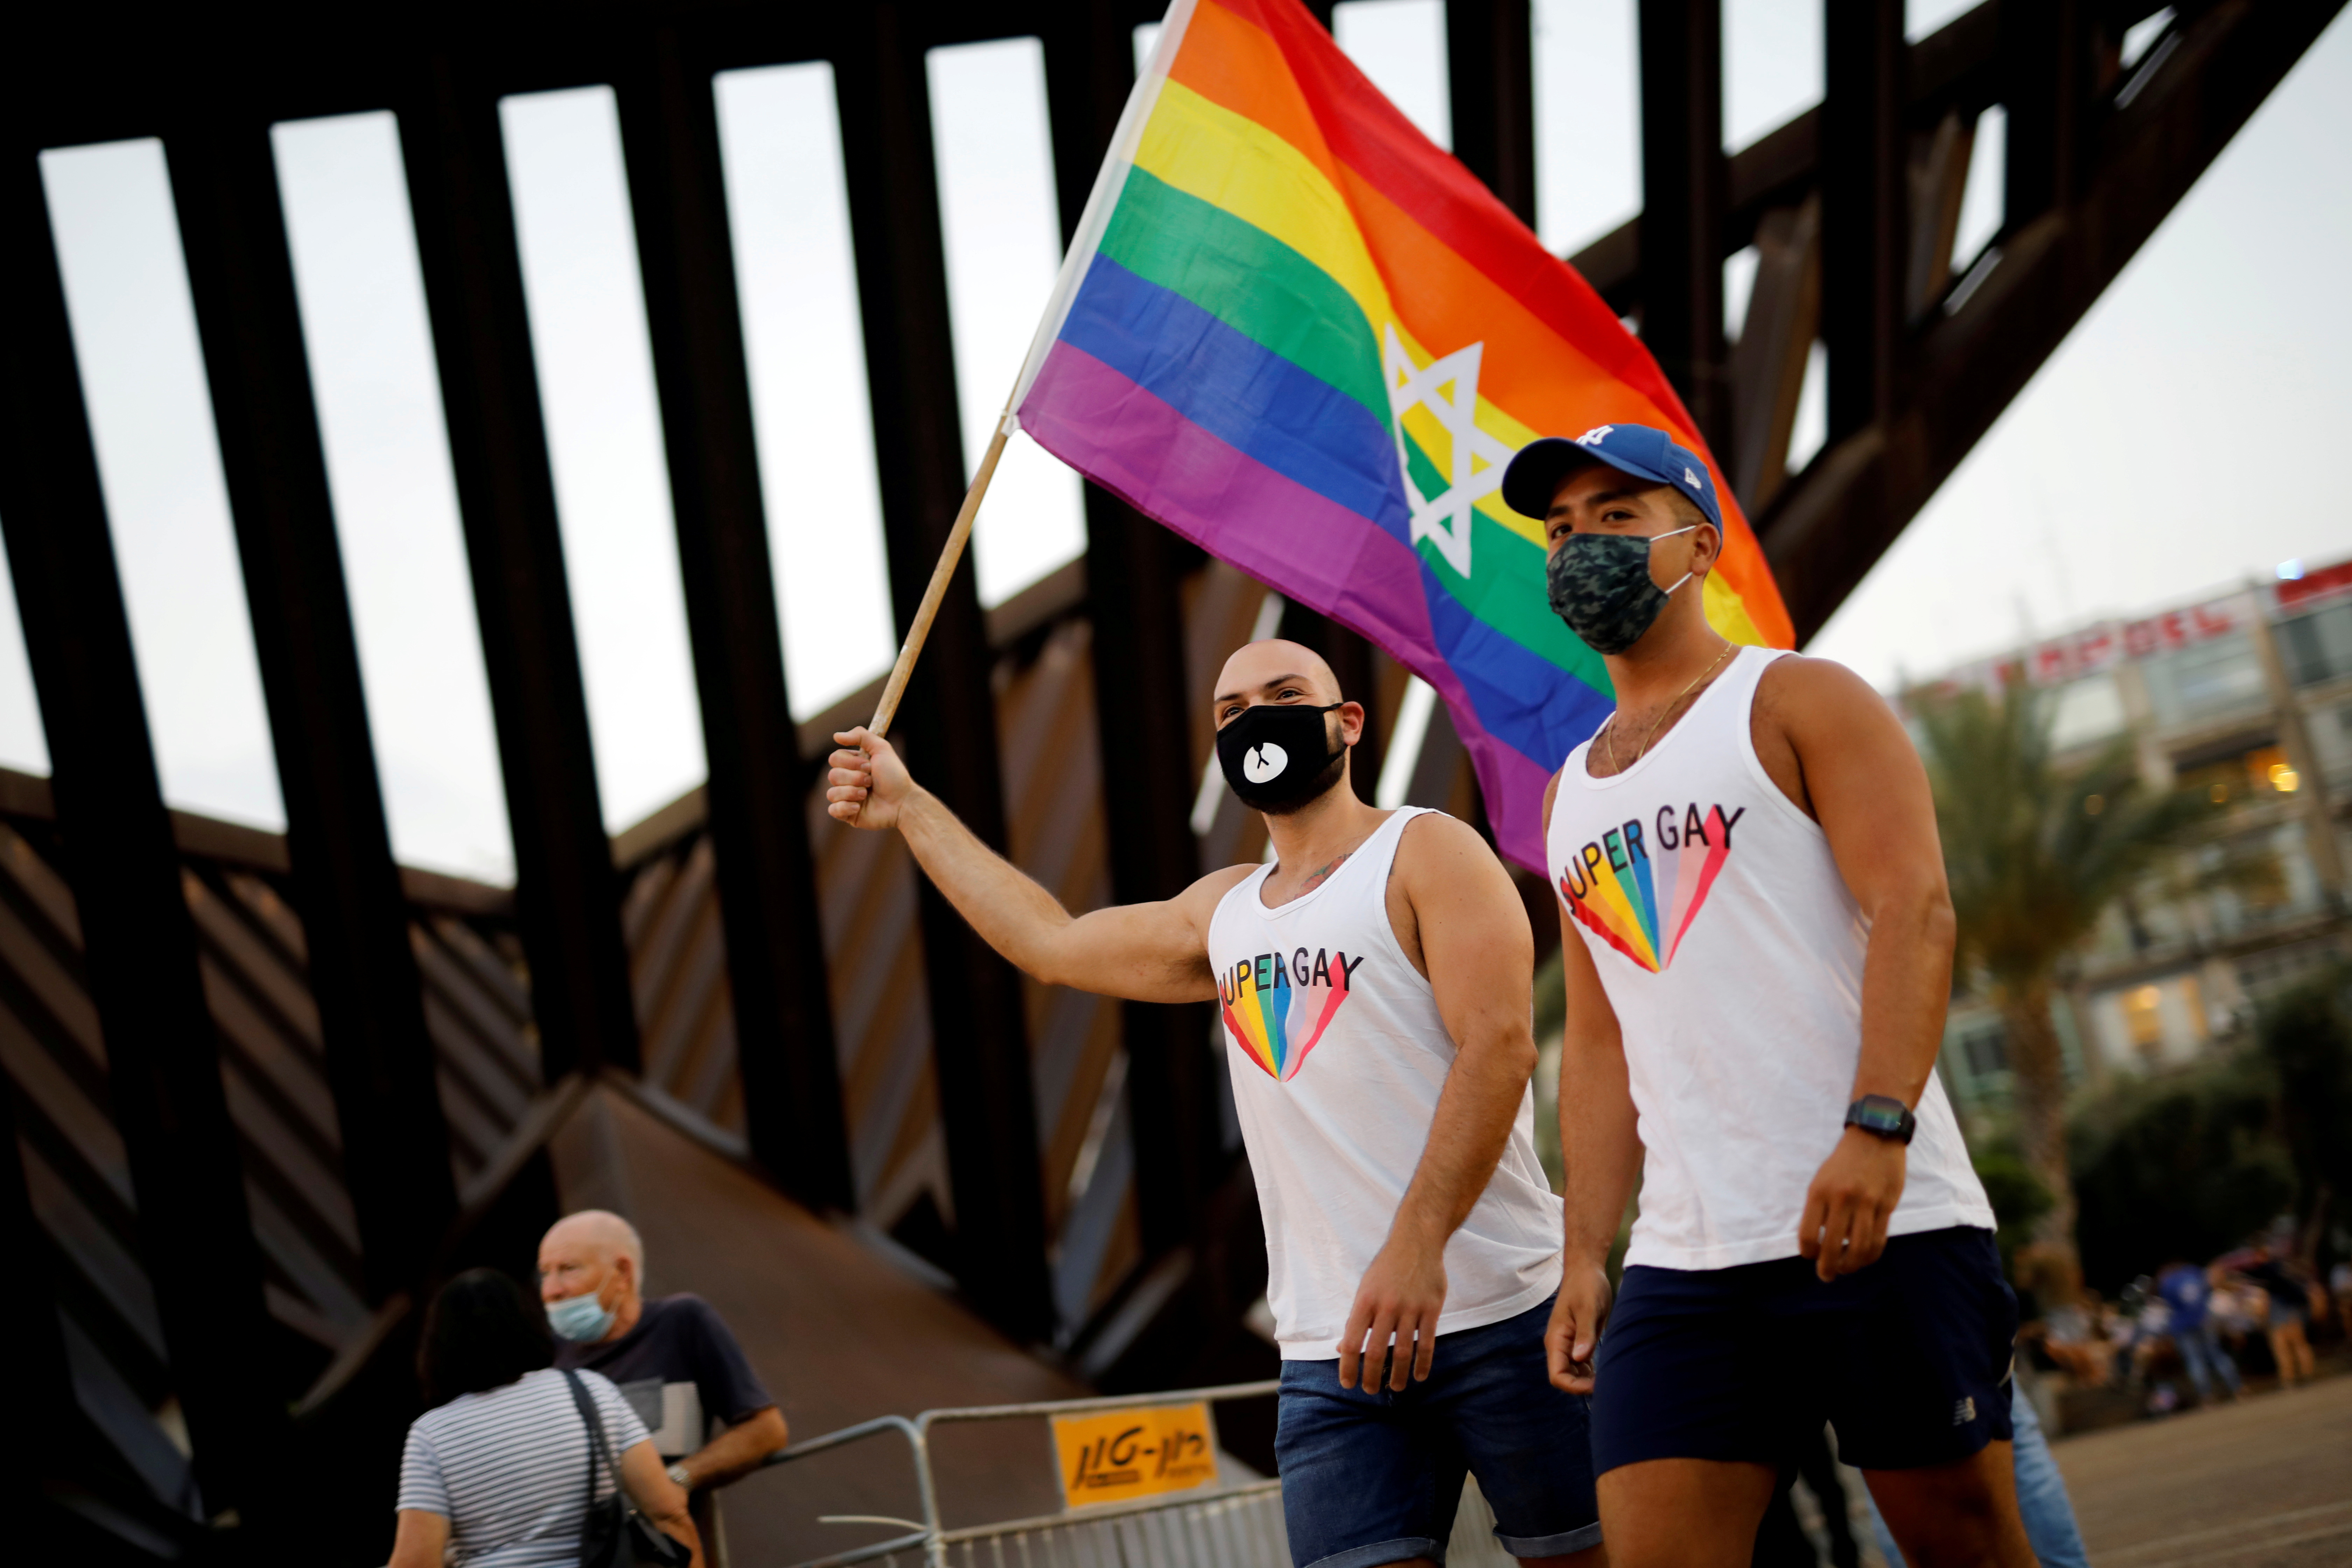 Israels Supreme Court rules in favour of same-sex couple surrogacy rights Reuters photo picture